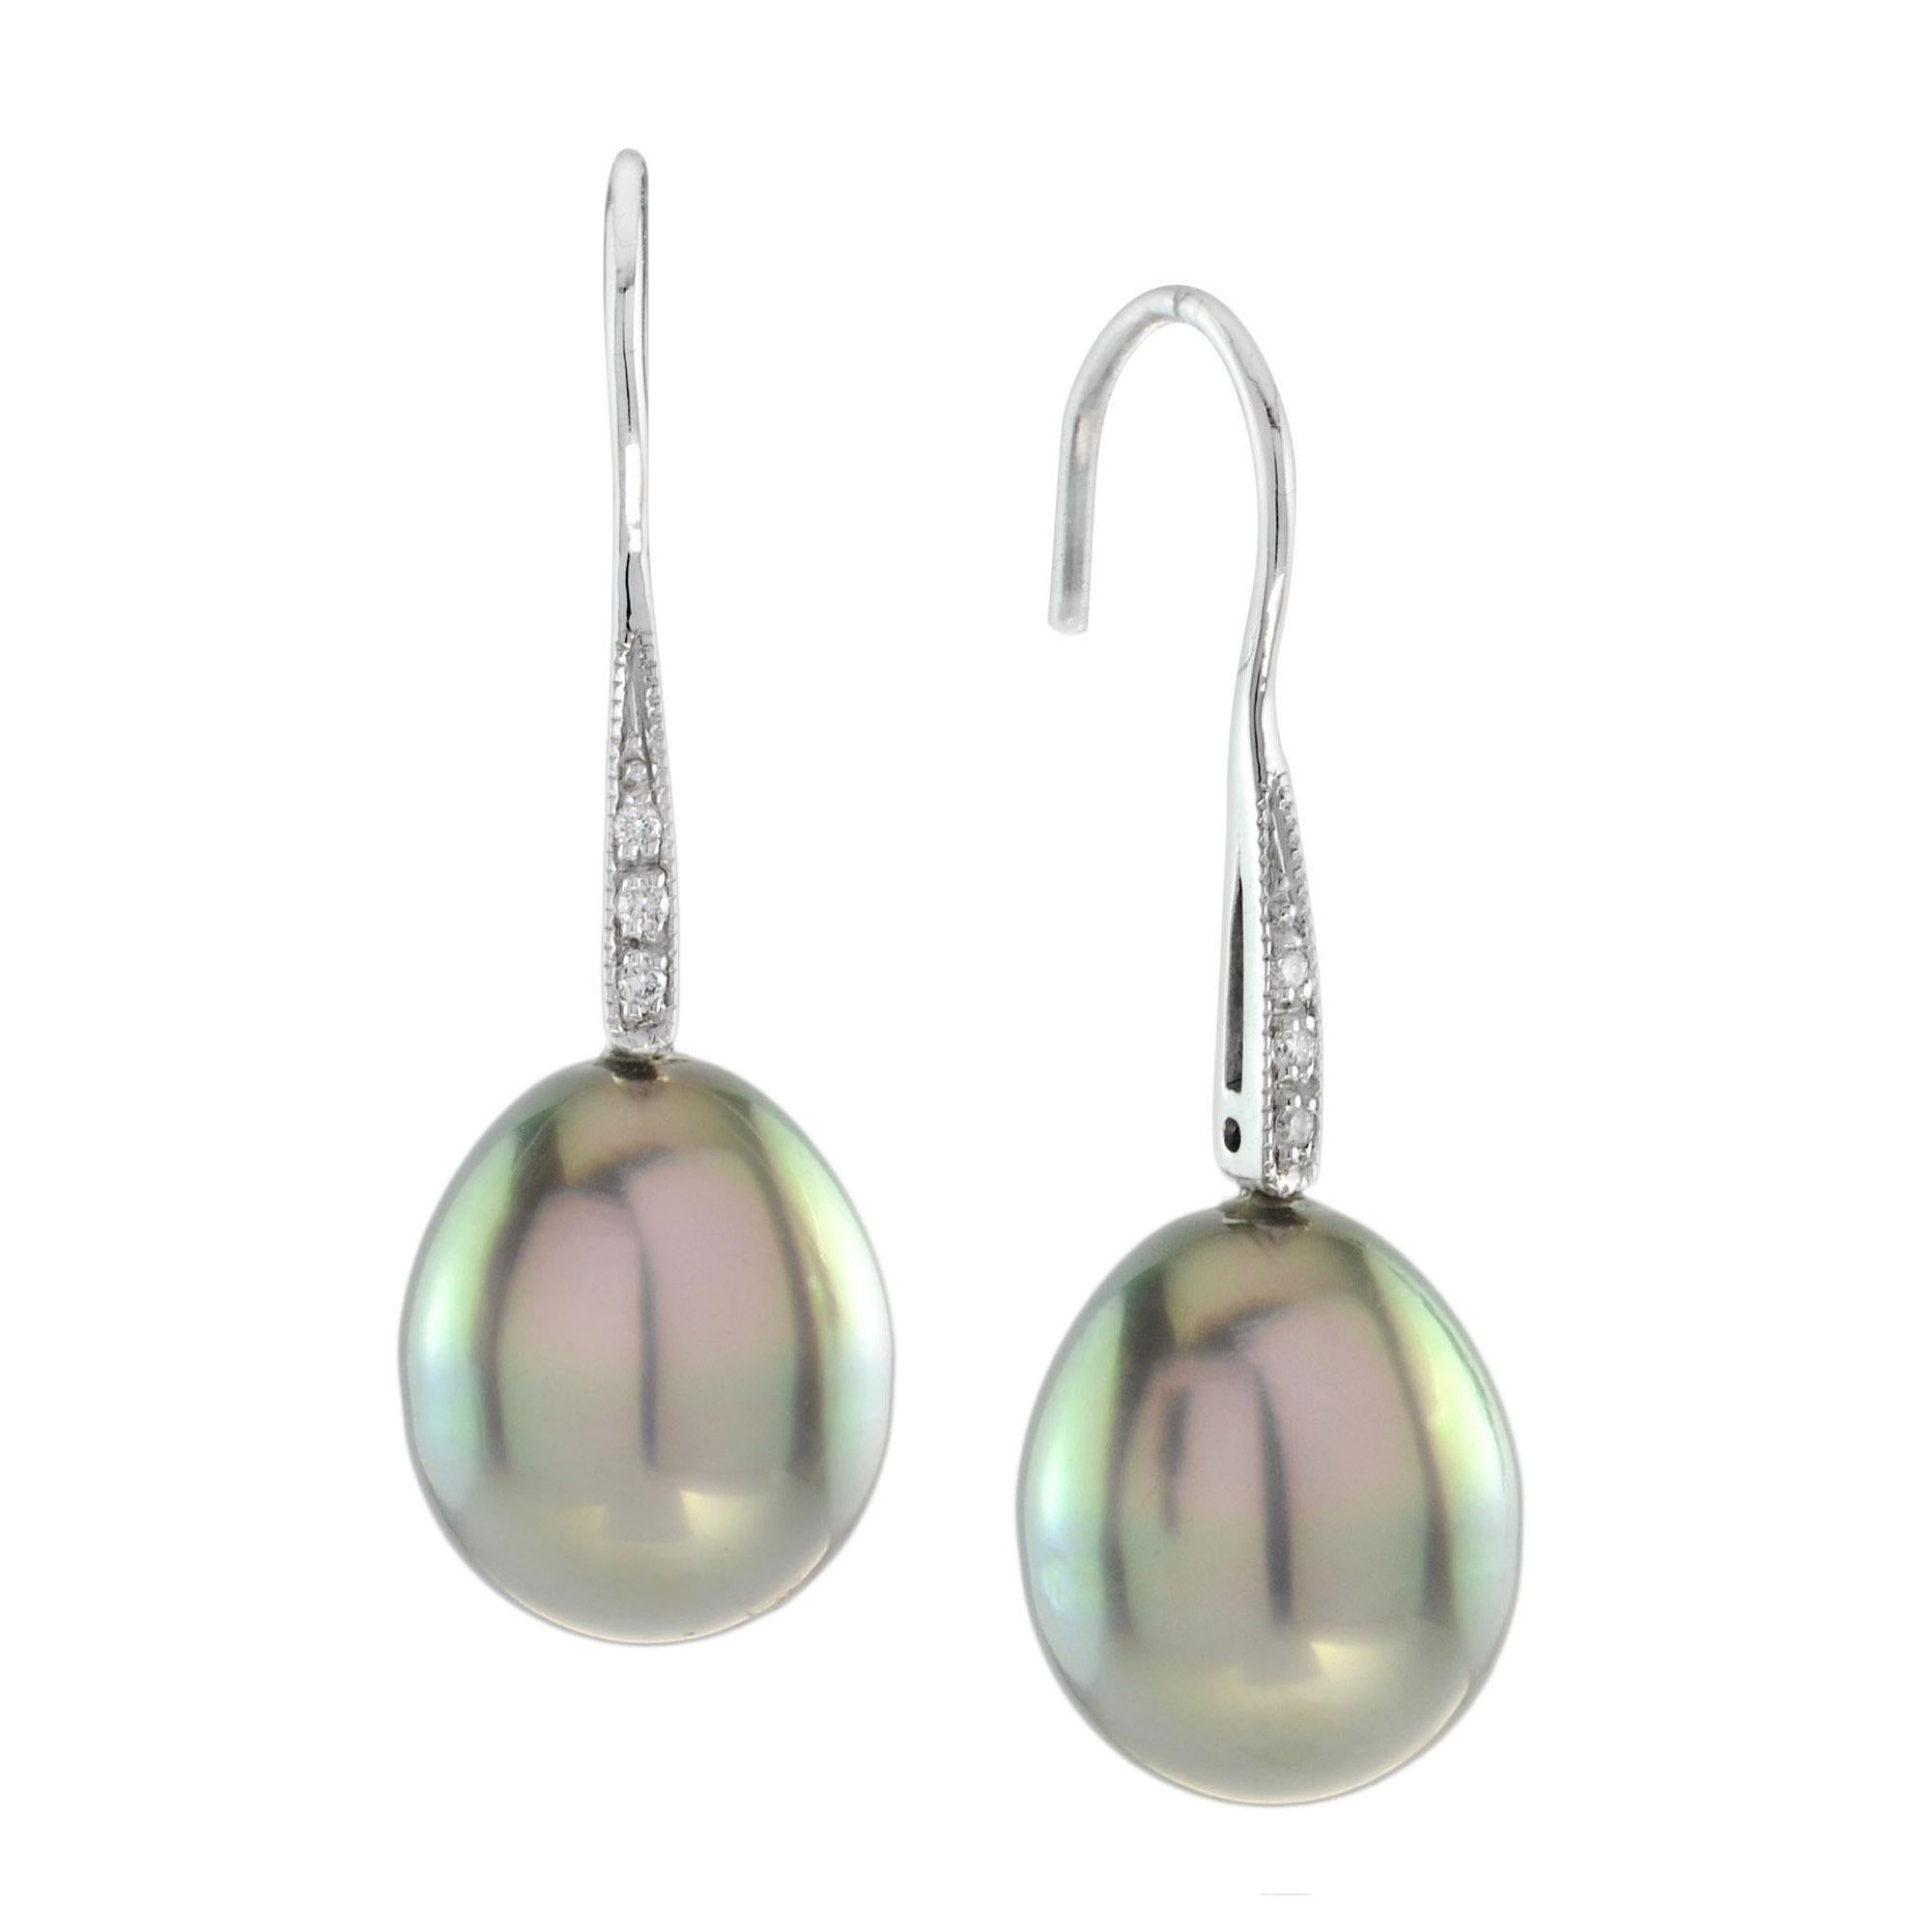 Art Deco Style South Sea Pearl and Diamond Drop Earrings in 18K White Gold